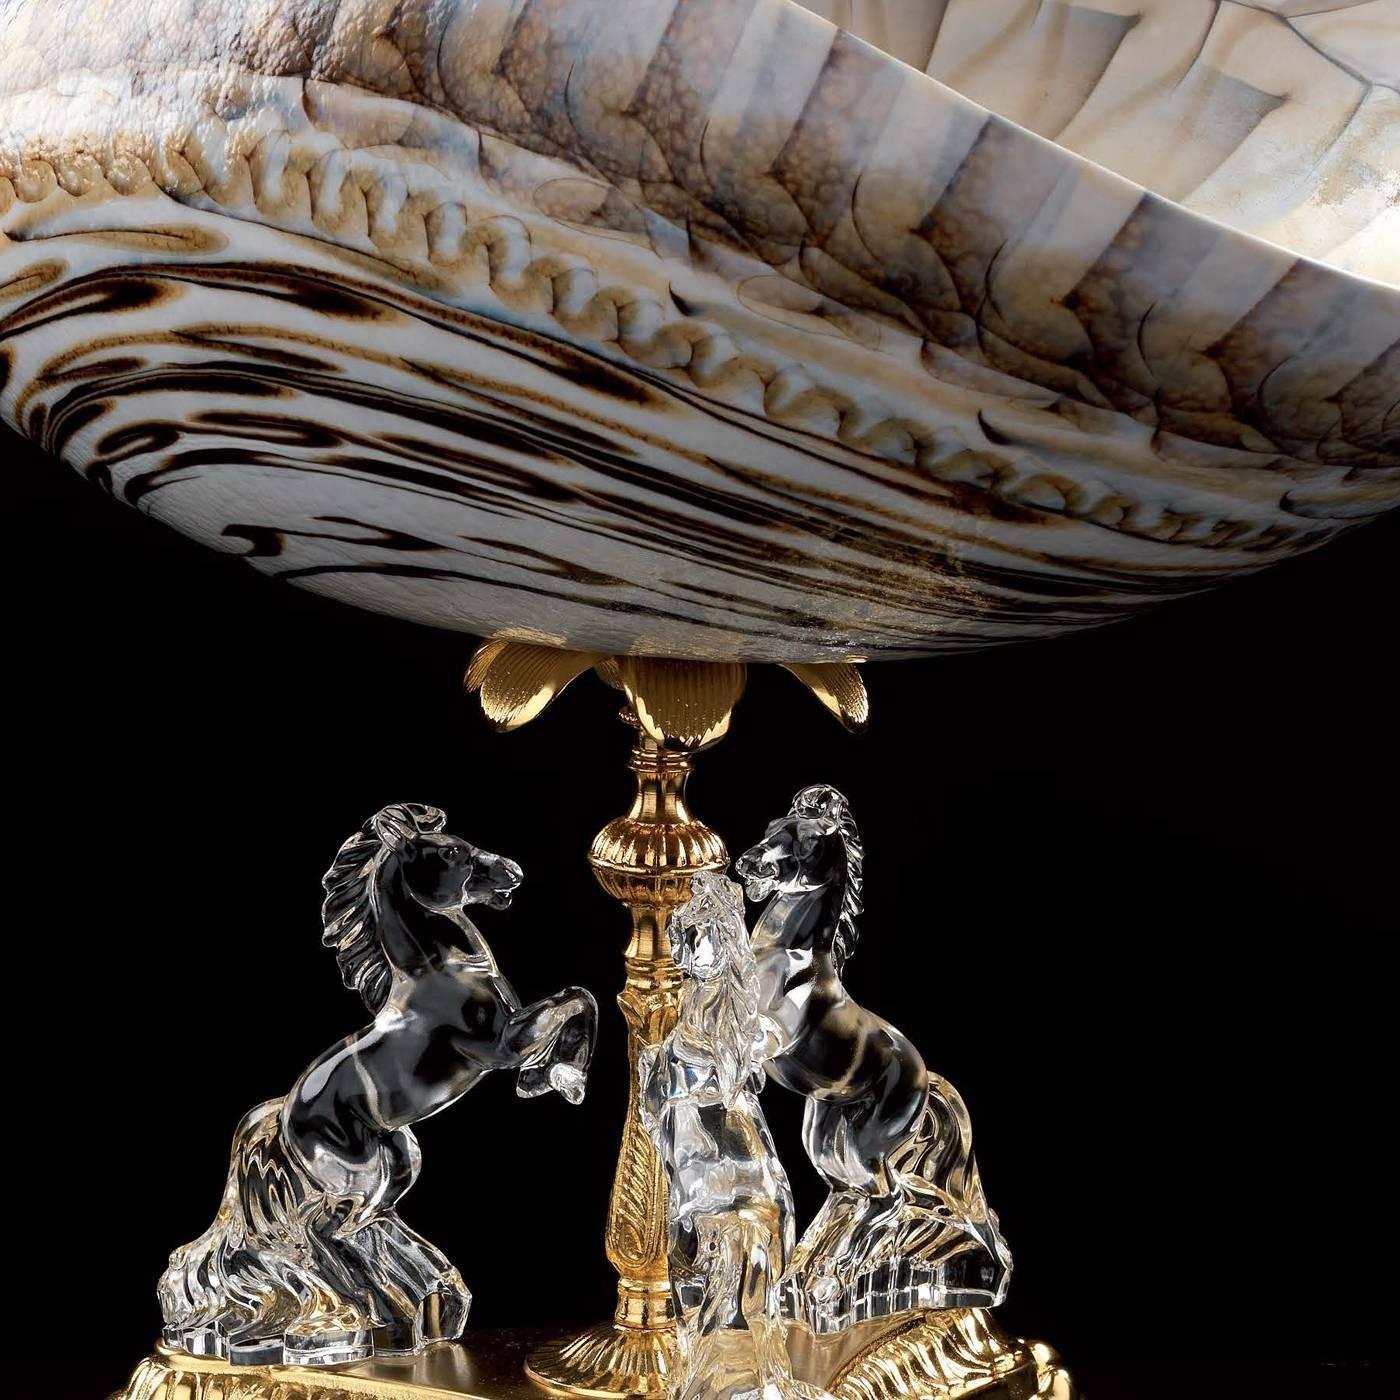 This centerpiece has a striking appearance and is constructed from three main components. The base and stand are in 24-karat gold-plated brass. Sitting on top of the base is a decoration featuring three horses exquisitely crafted entirely in clear